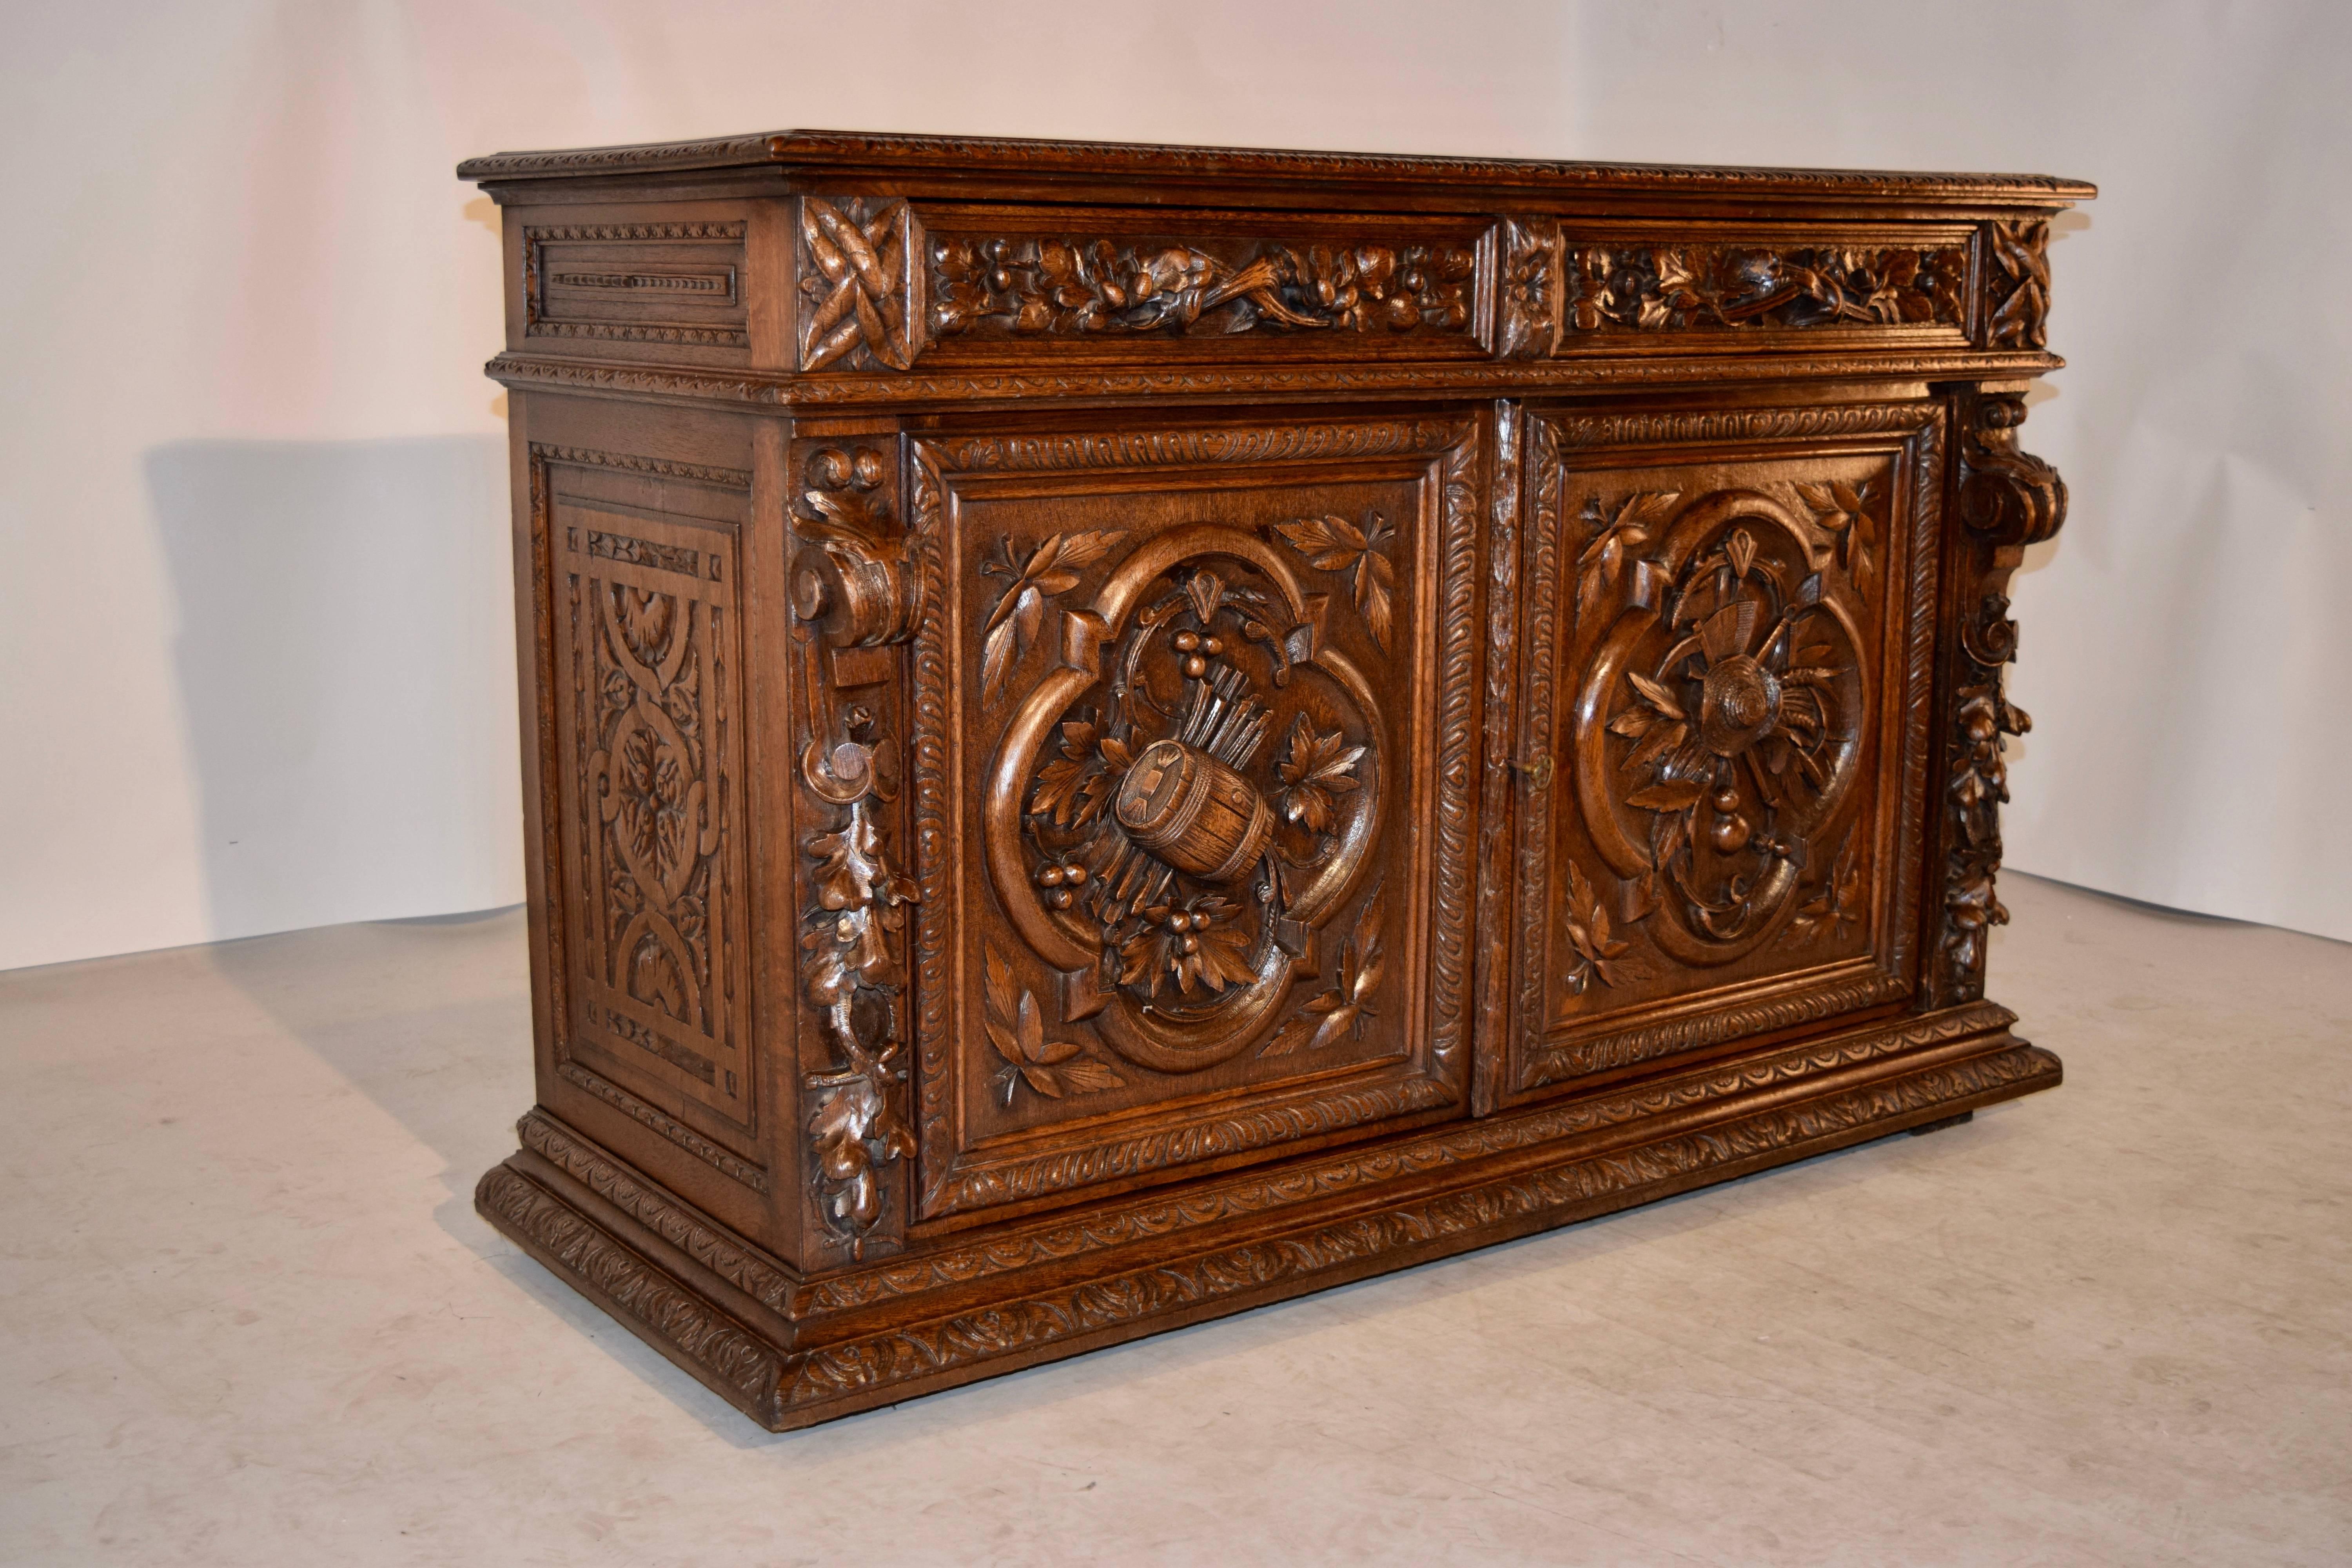 19th century carved French buffet made from oak. The top is banded and has a wonderfully bevelled edge with gadrooning, following down to panelled and carved sides on the sides, and heavily carved decorated drawer fronts and doors on the front. The